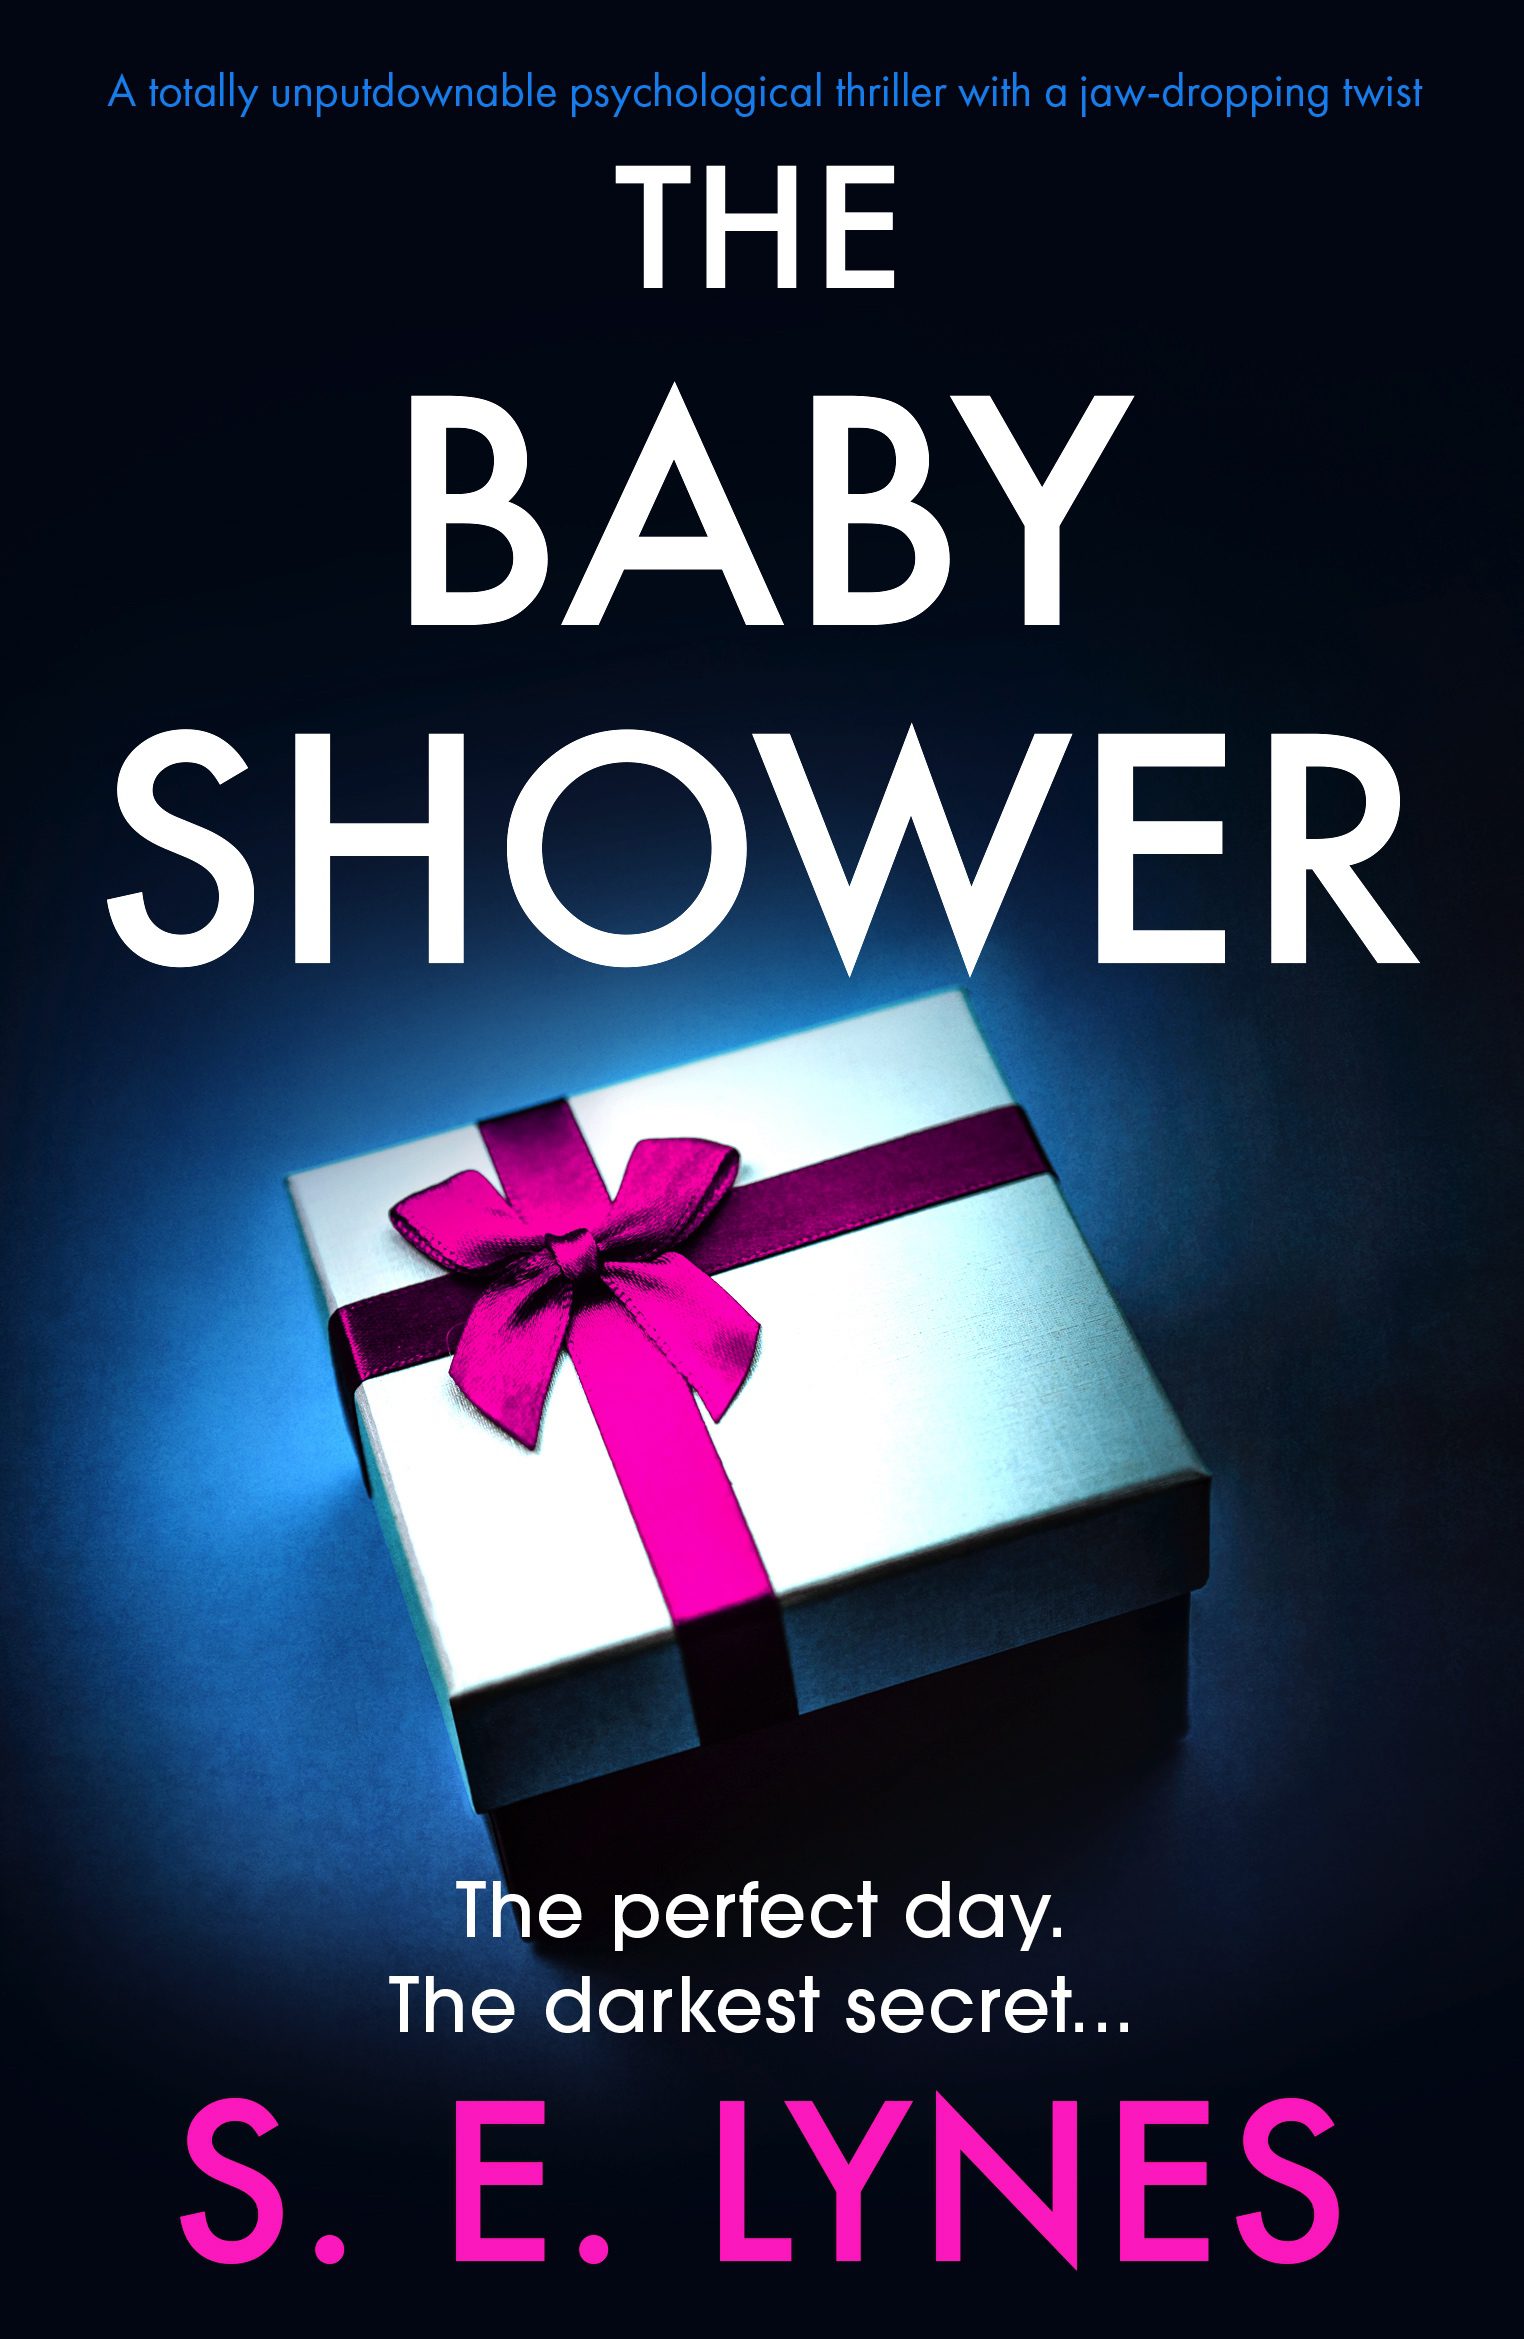 The Baby Shower book cover